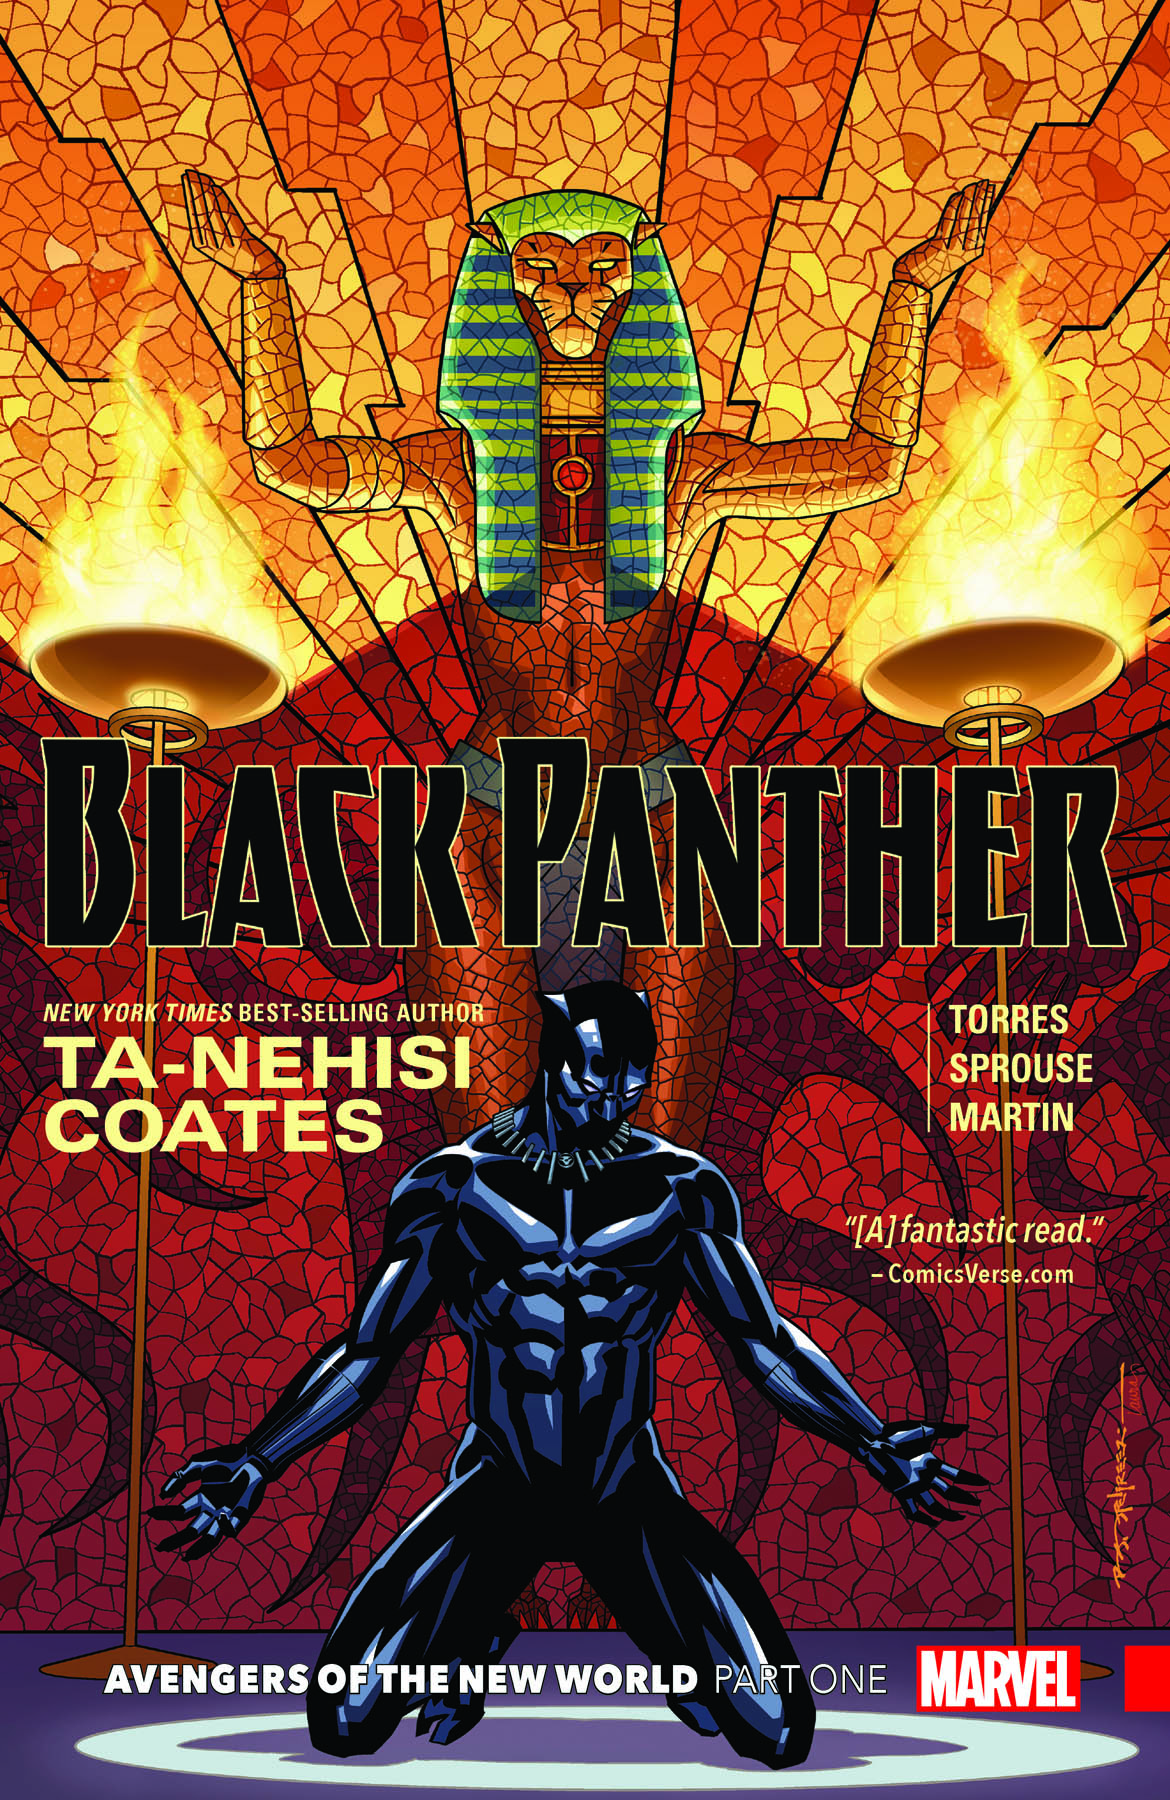 Black Panther Book 4: Avengers Of The New World Part 1 (Trade Paperback)